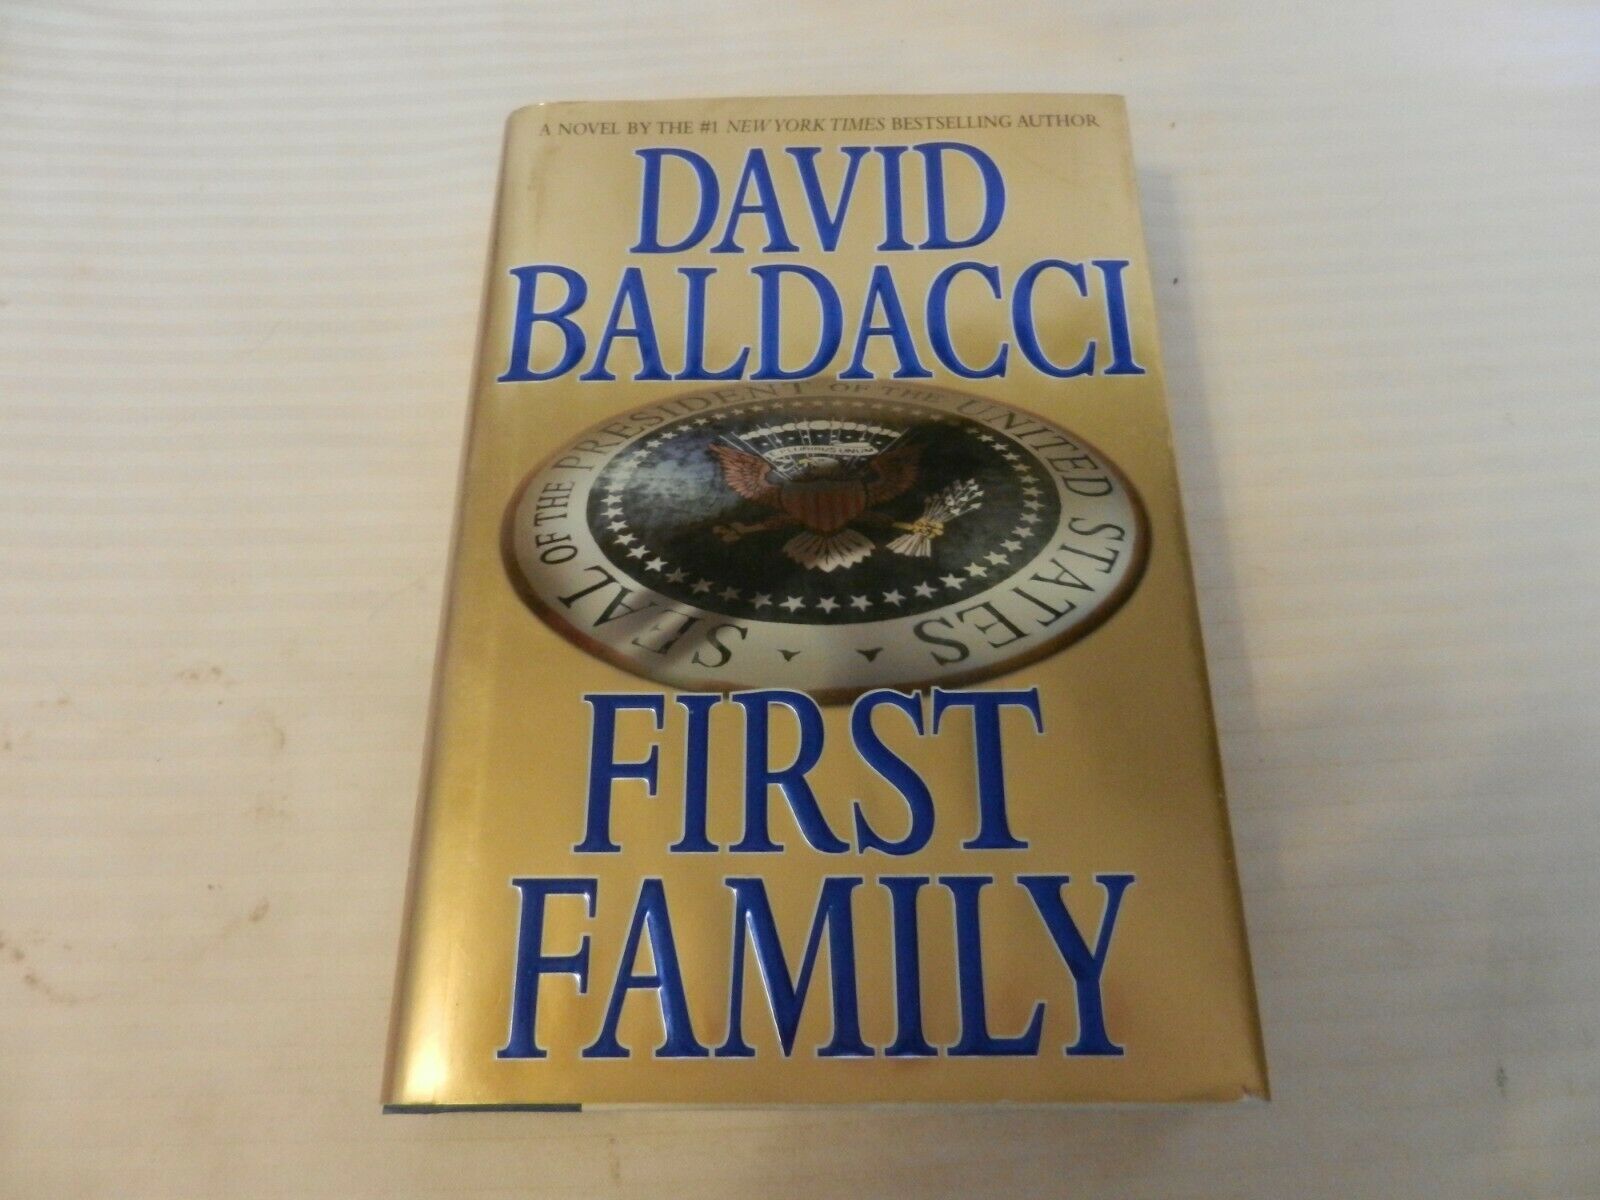 first family by david baldacci